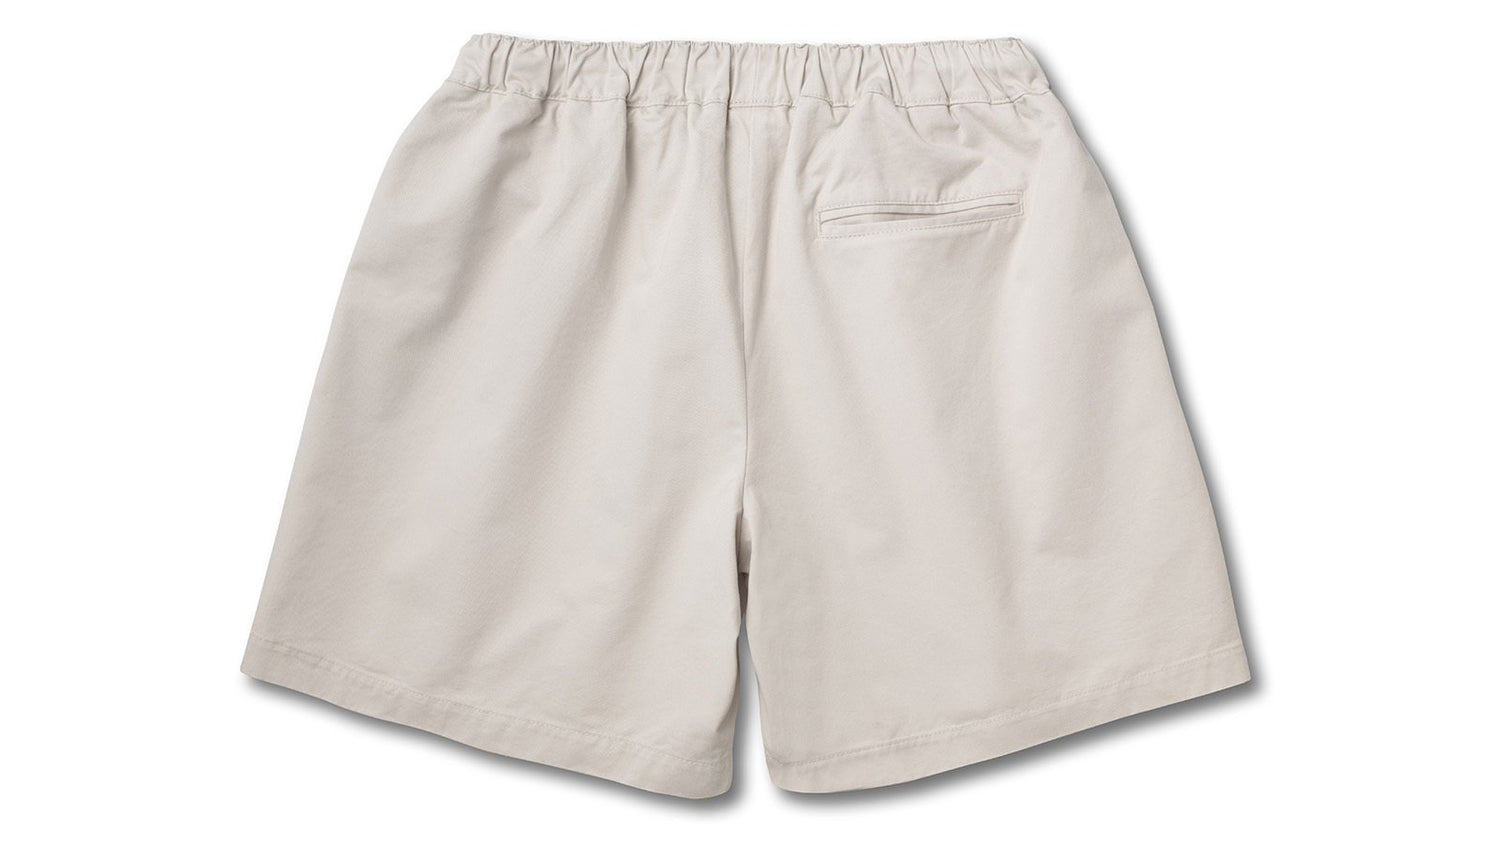 TRAMPAS SHORTS - SILVER LINING / MINERAL BLUE